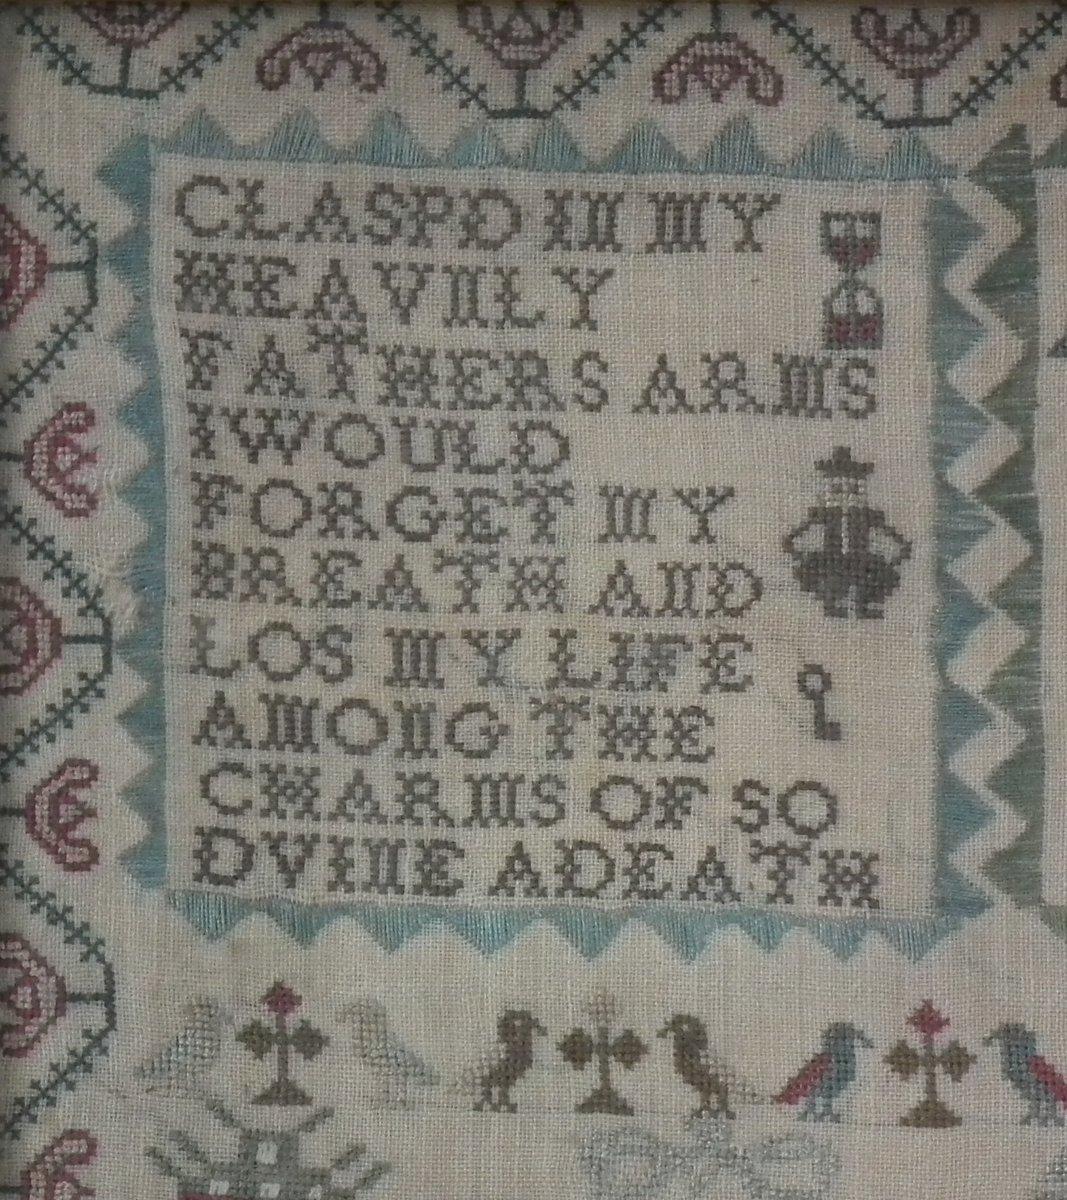 Other Scottish Sampler, 1803 by Jannet Anderson, 10